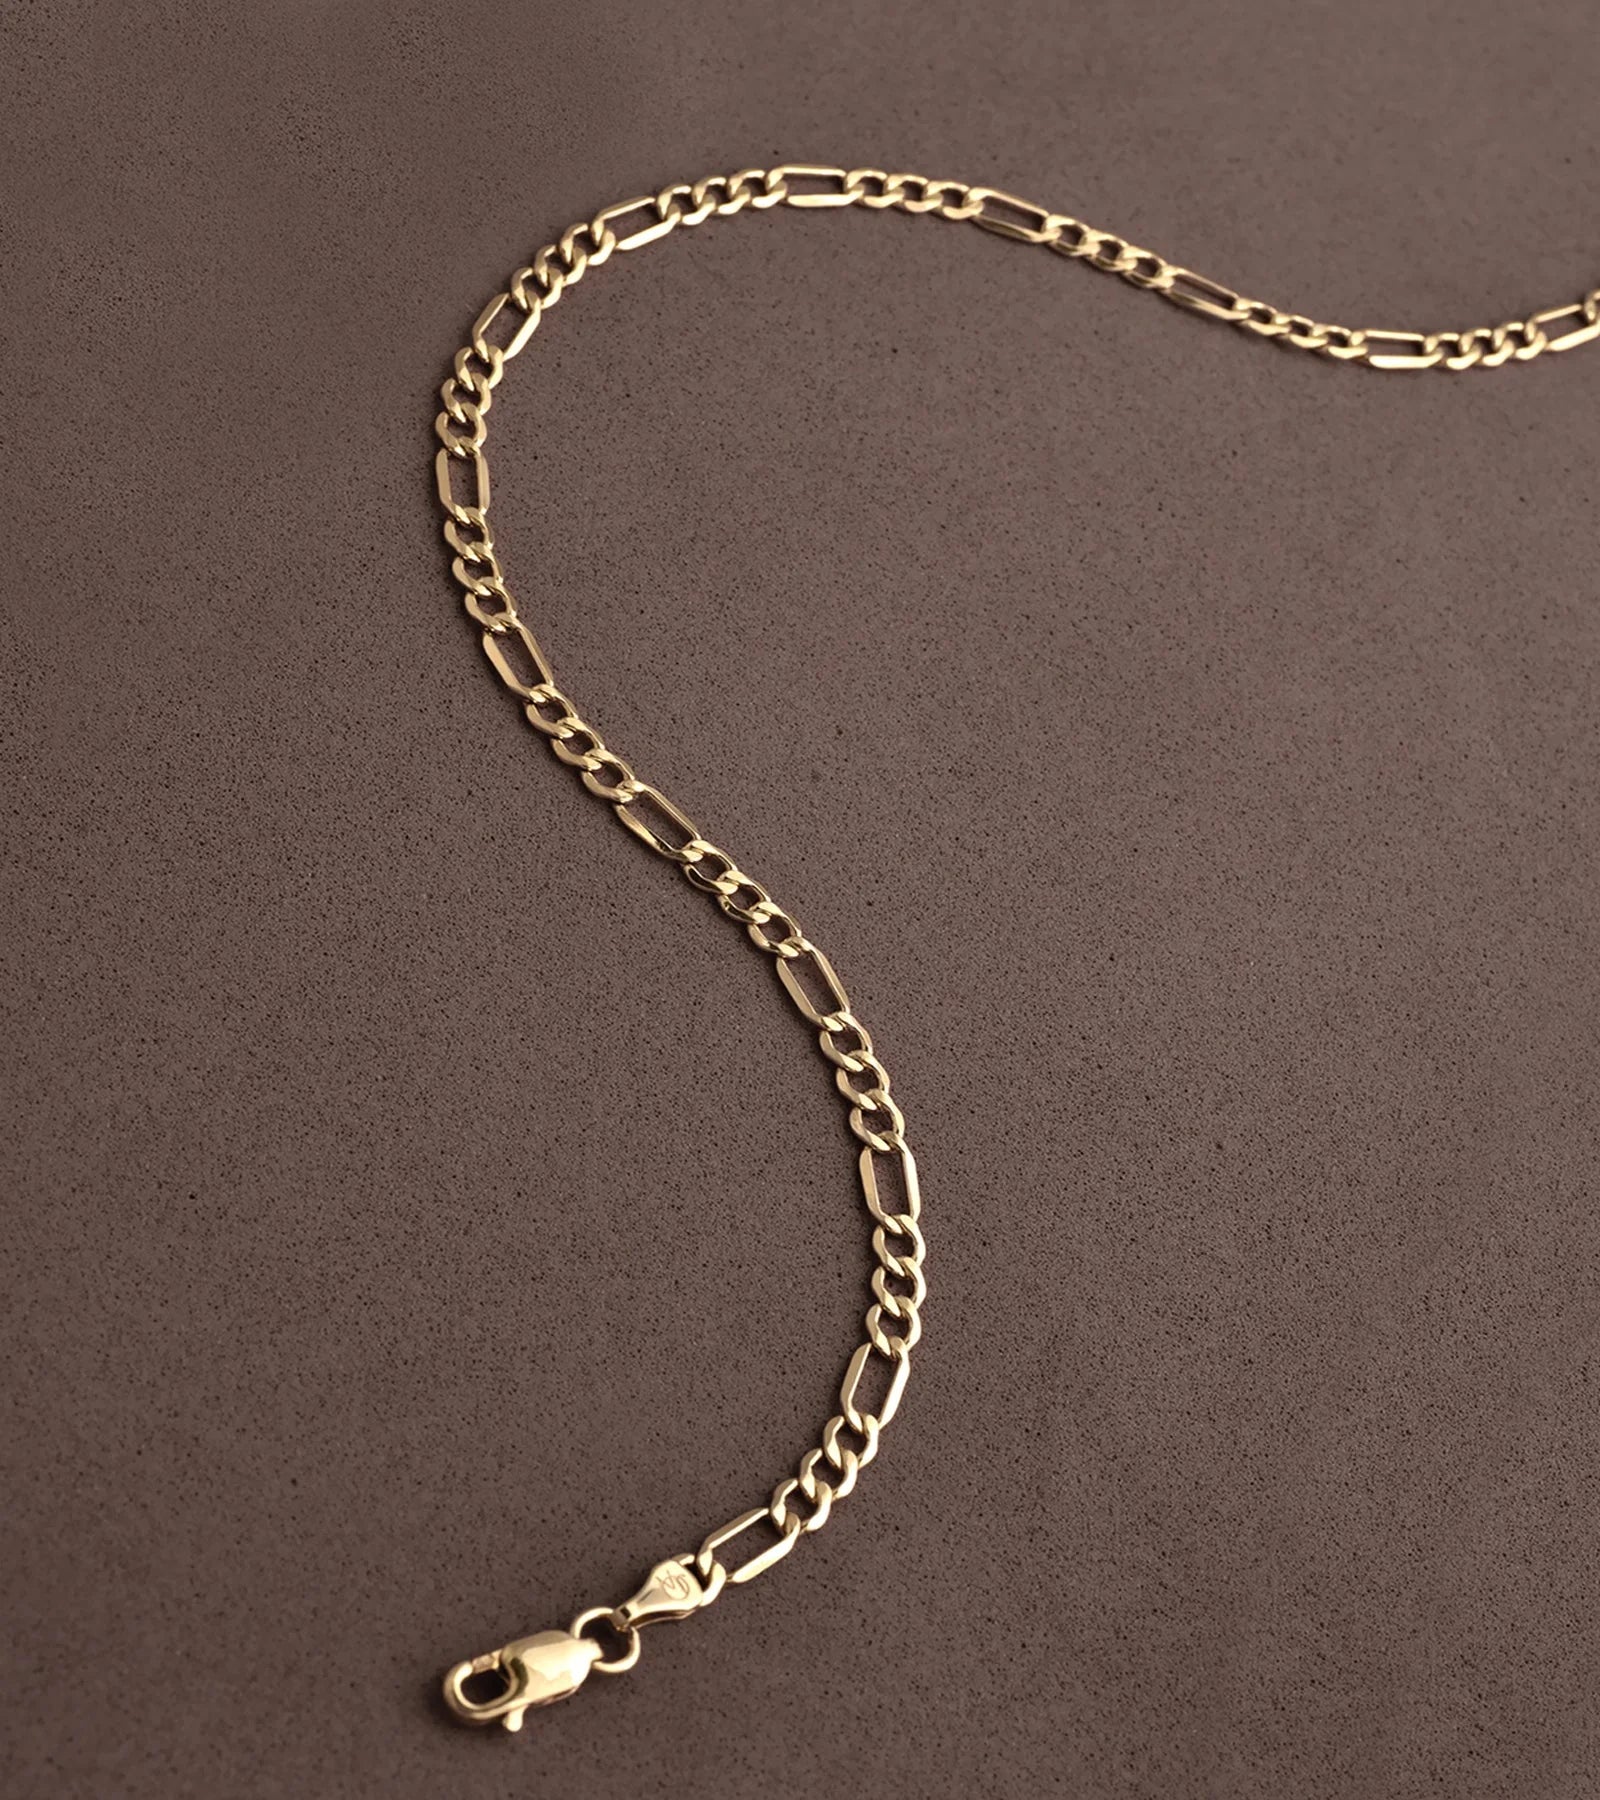 Gold Chain Necklace Collection - 14K Solid Yellow Gold Filled Figaro Chain Necklaces for Women and Men with Different Sizes (2.8Mm, 3.7Mm, 4.7Mm, 5.6Mm)